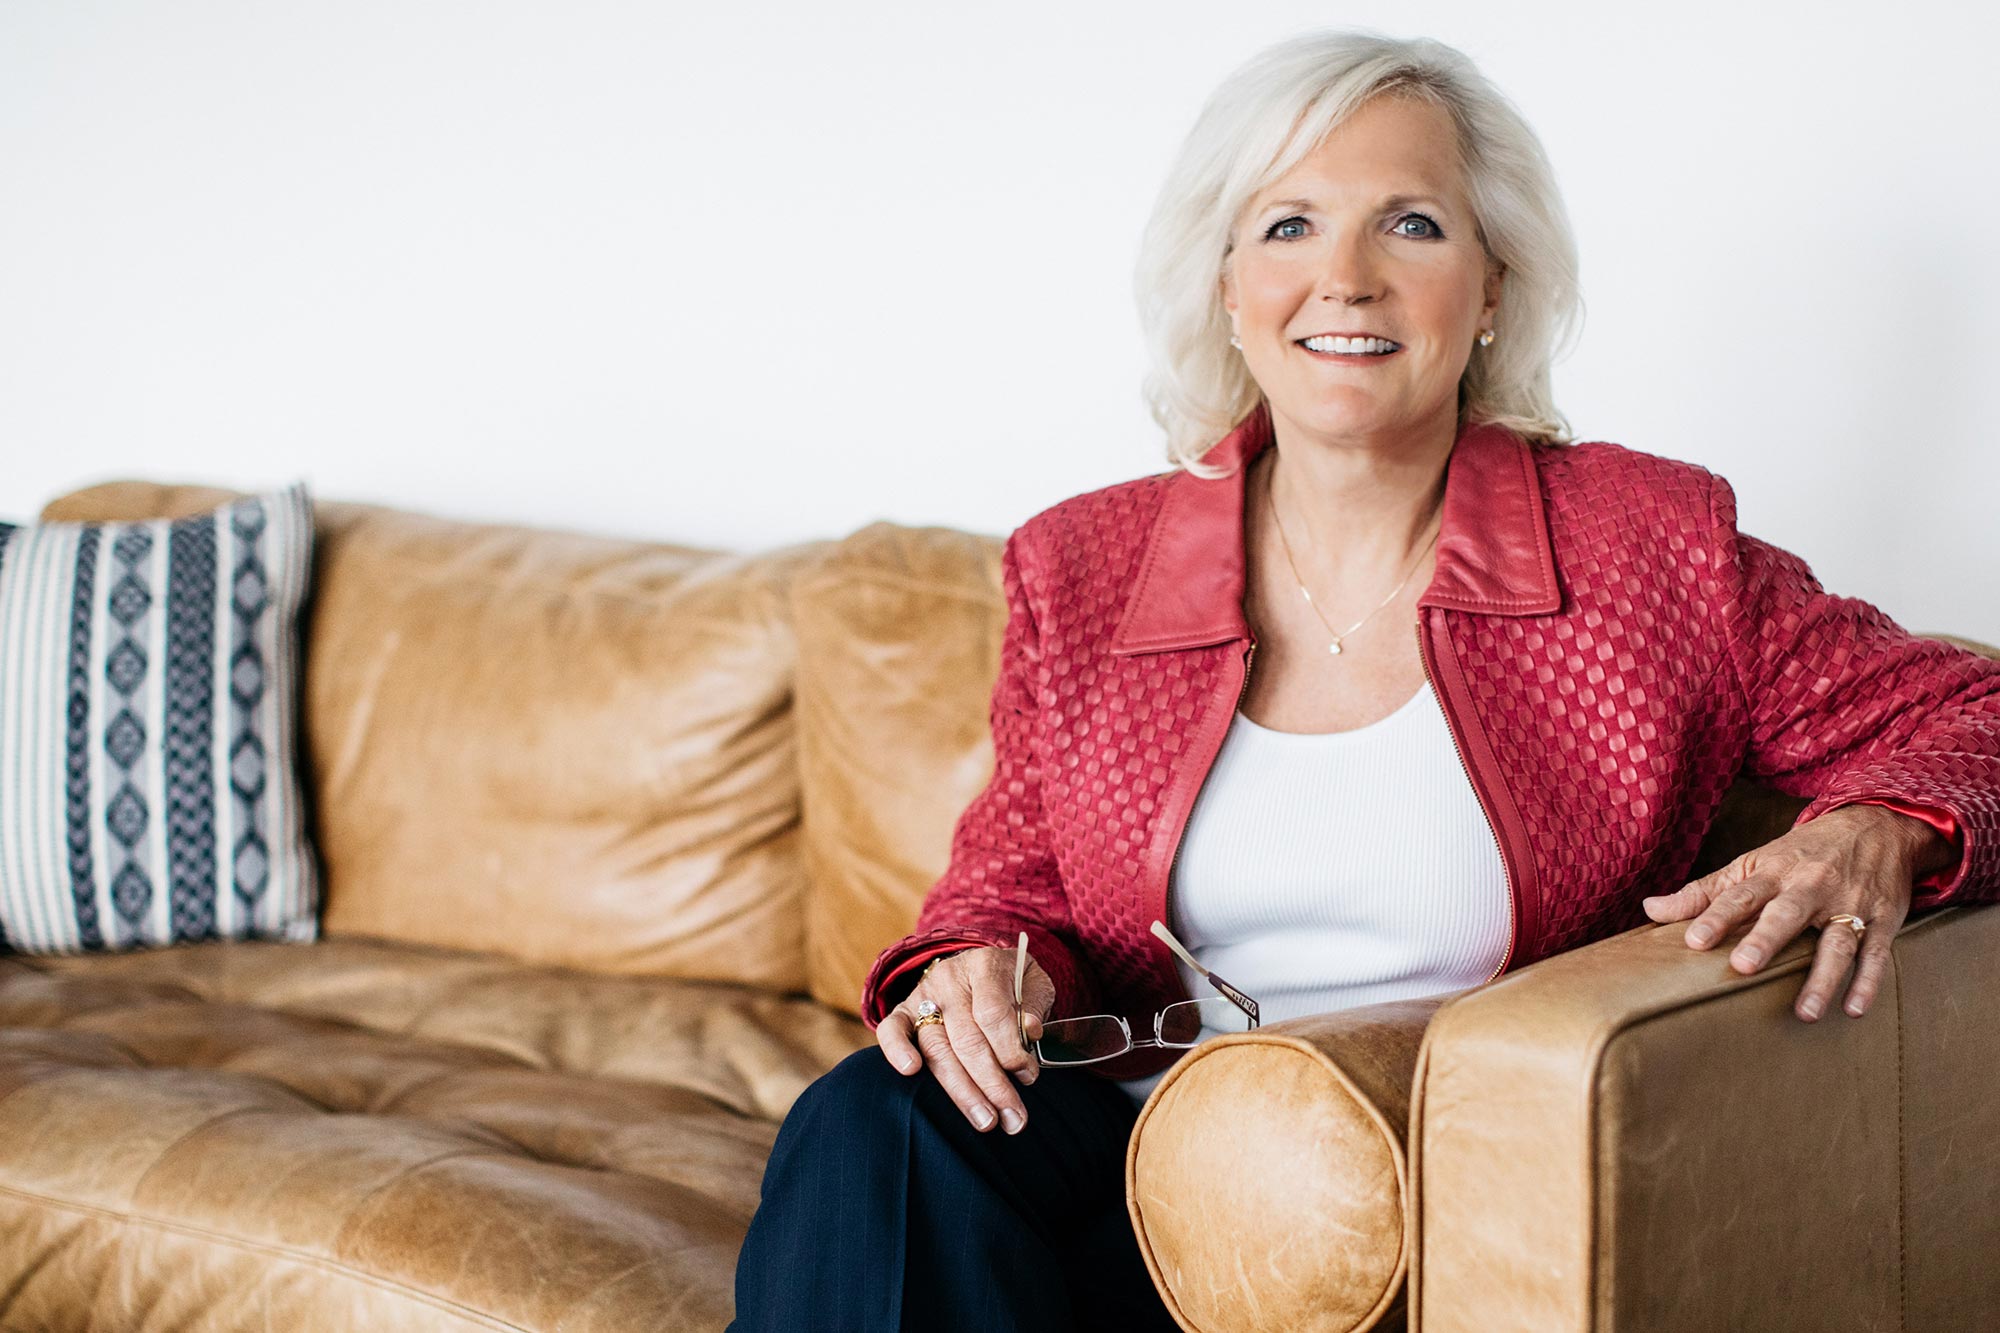 photograph of Nancy M. Dahl sitting on couch